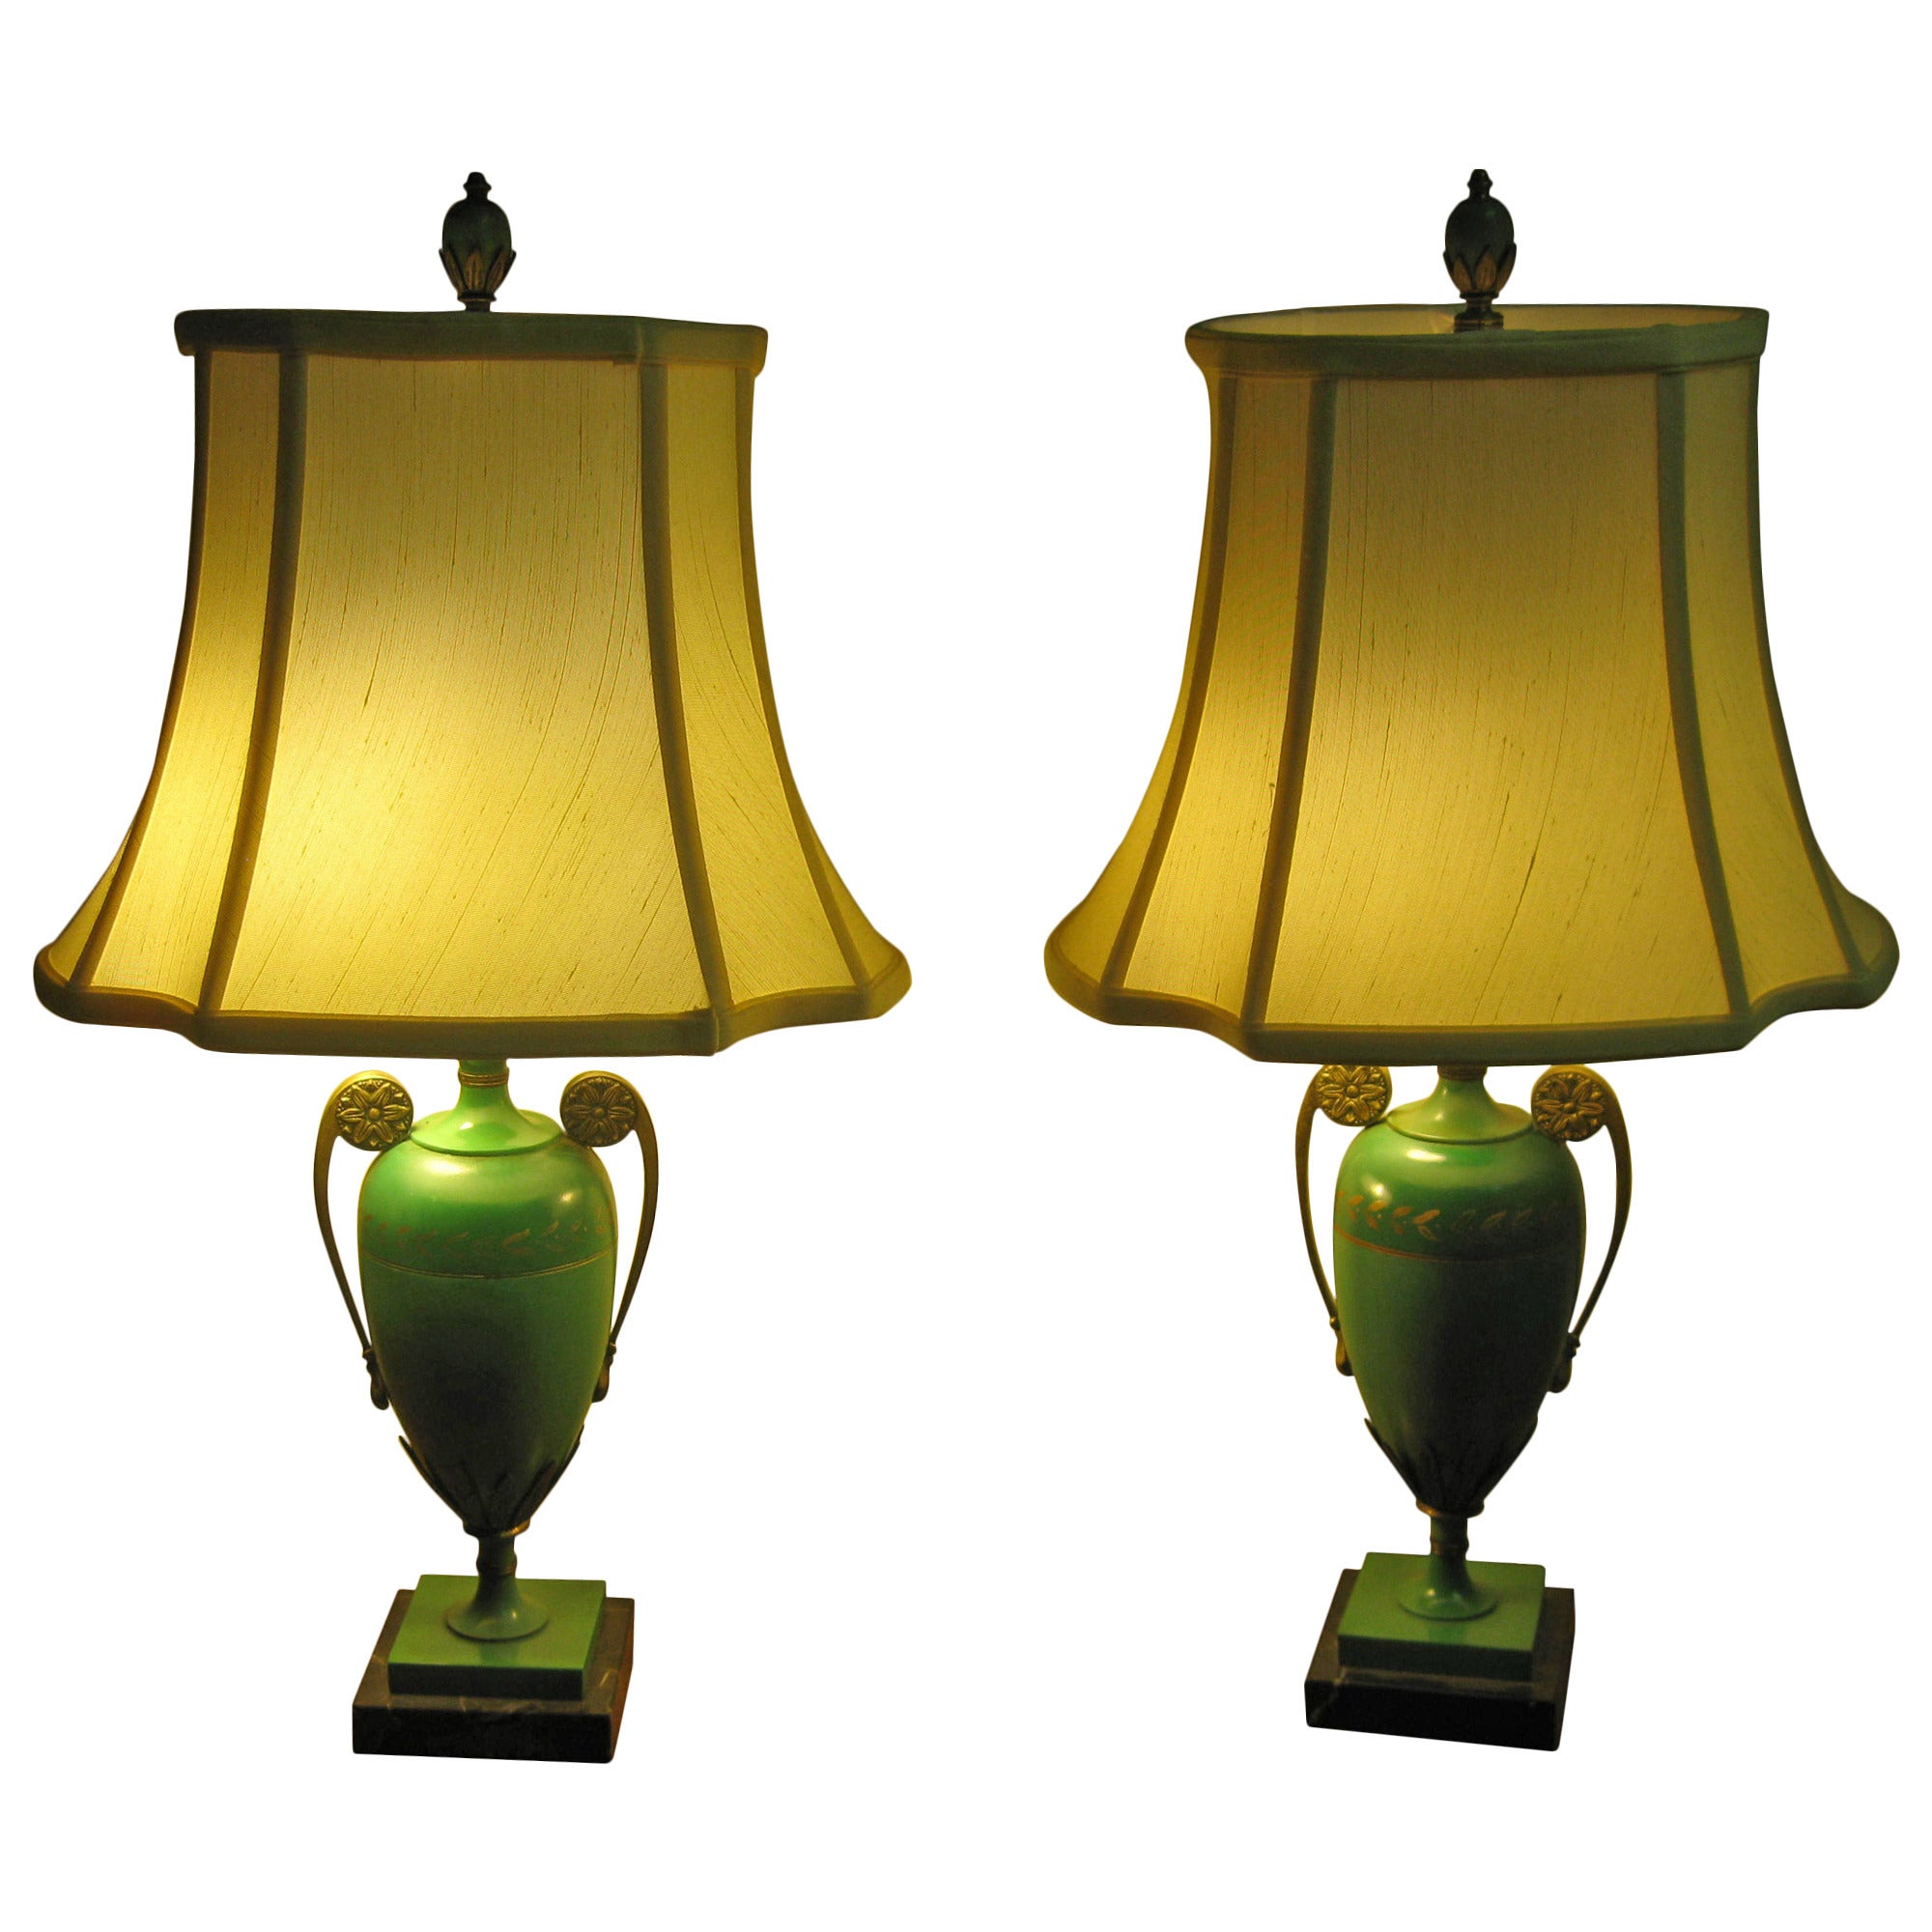 Pair of French Art Deco Tole Lamps